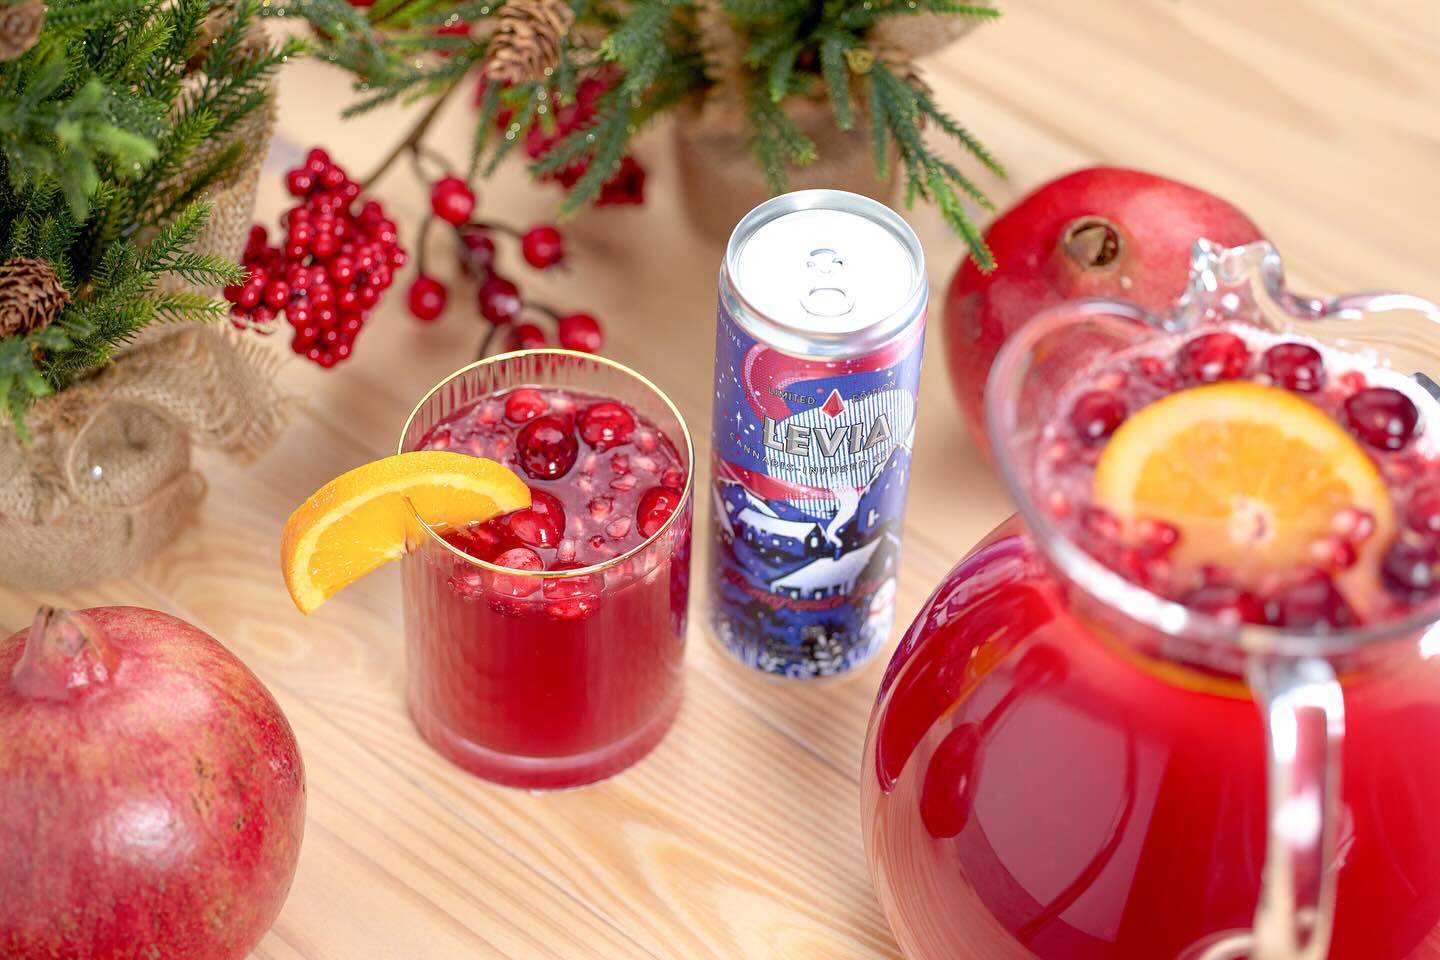 Impress your guests this holiday season with LEVIA mocktail